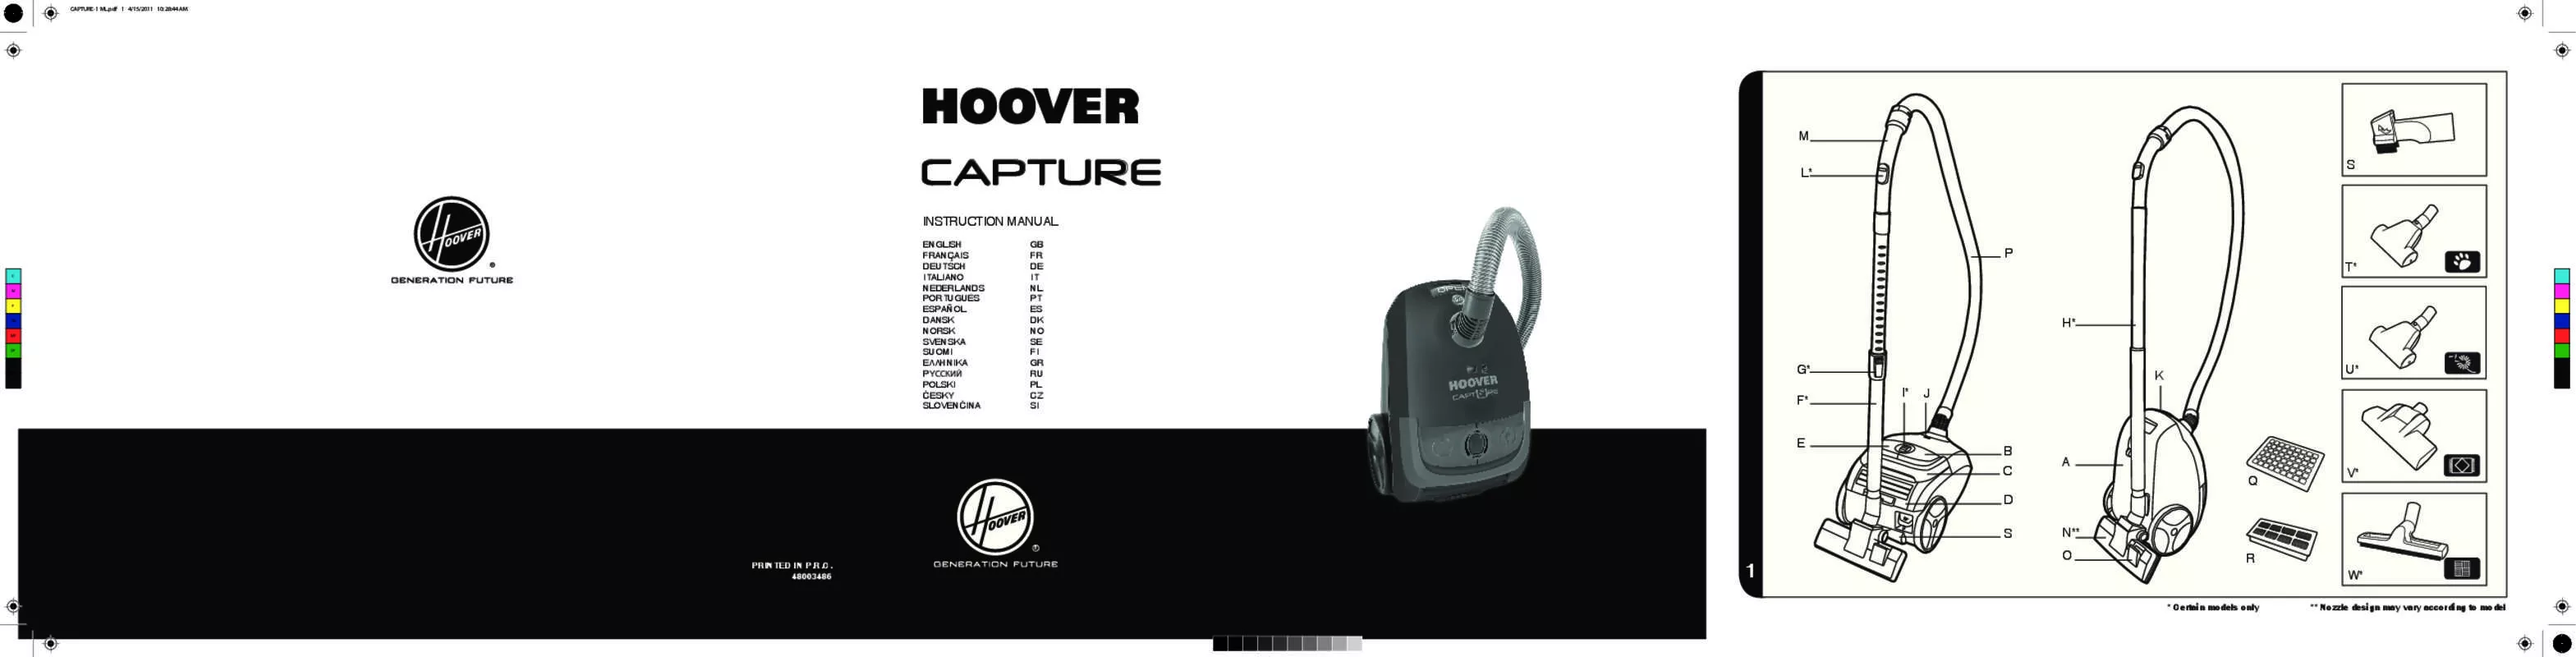 Mode d'emploi HOOVER CP70 CP20 CAPTURE